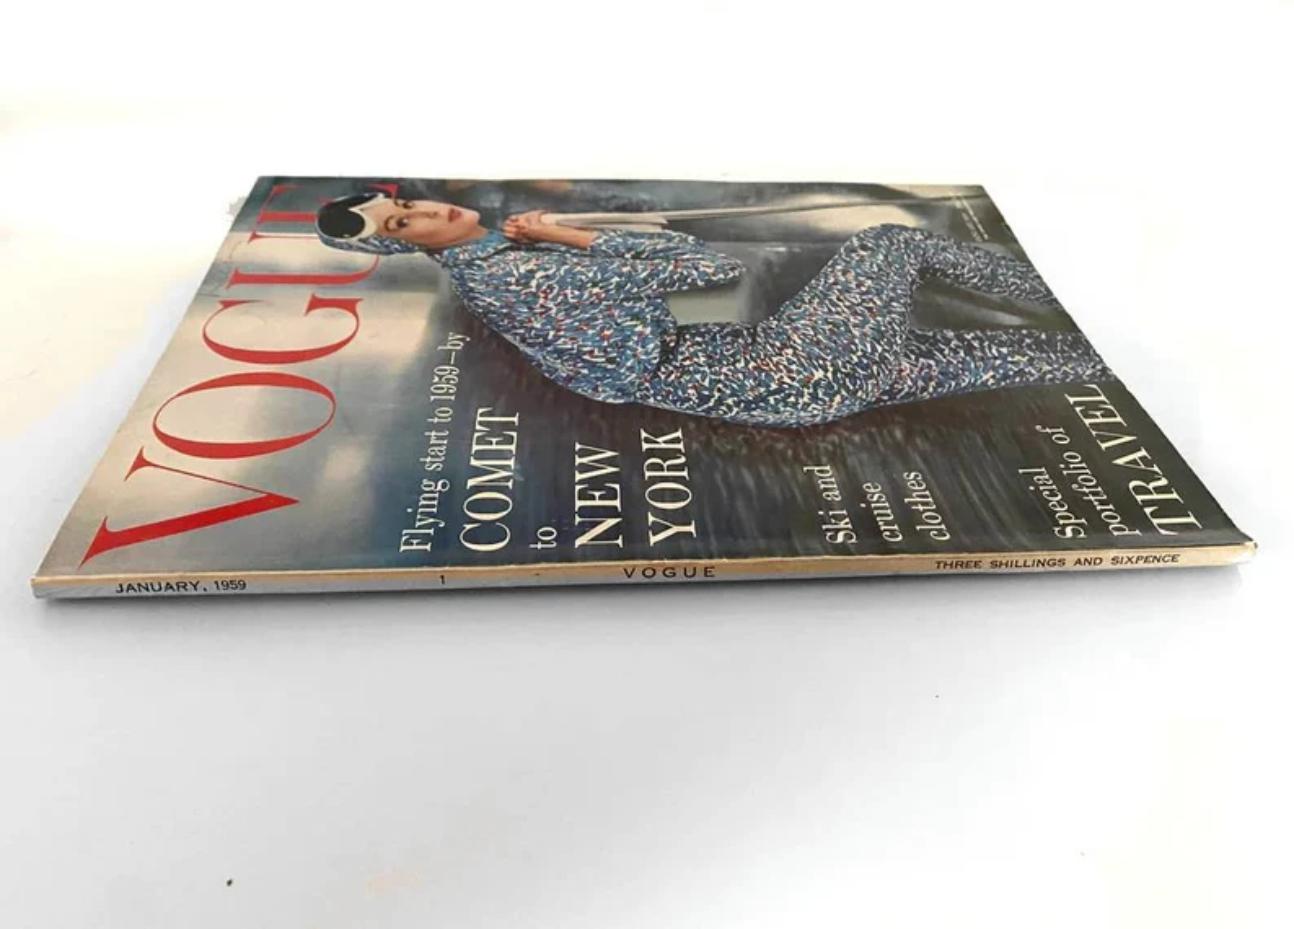 Vogue UK 1959 January Issue, photo Eugene Vernier, ski and cruise clothes, Tony Armstrong Jones. This issue's cover Vogue cover is one of the inspirational images behind Iain R Webb's coloring book

Features: BOAC Comet to New York, Cruising, The